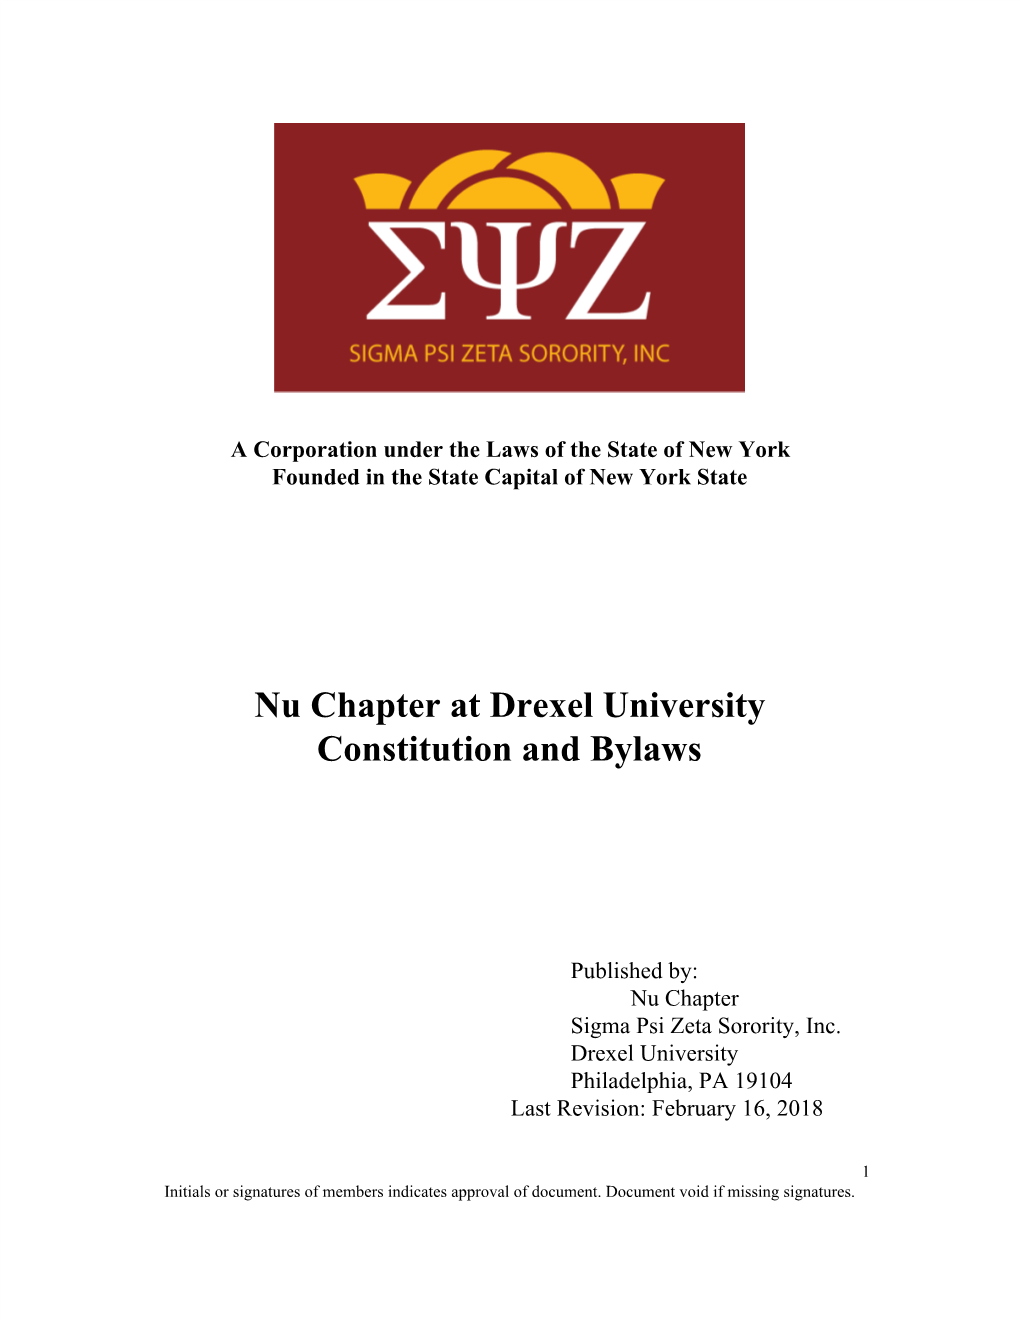 Nu Chapter at Drexel University Constitution and Bylaws